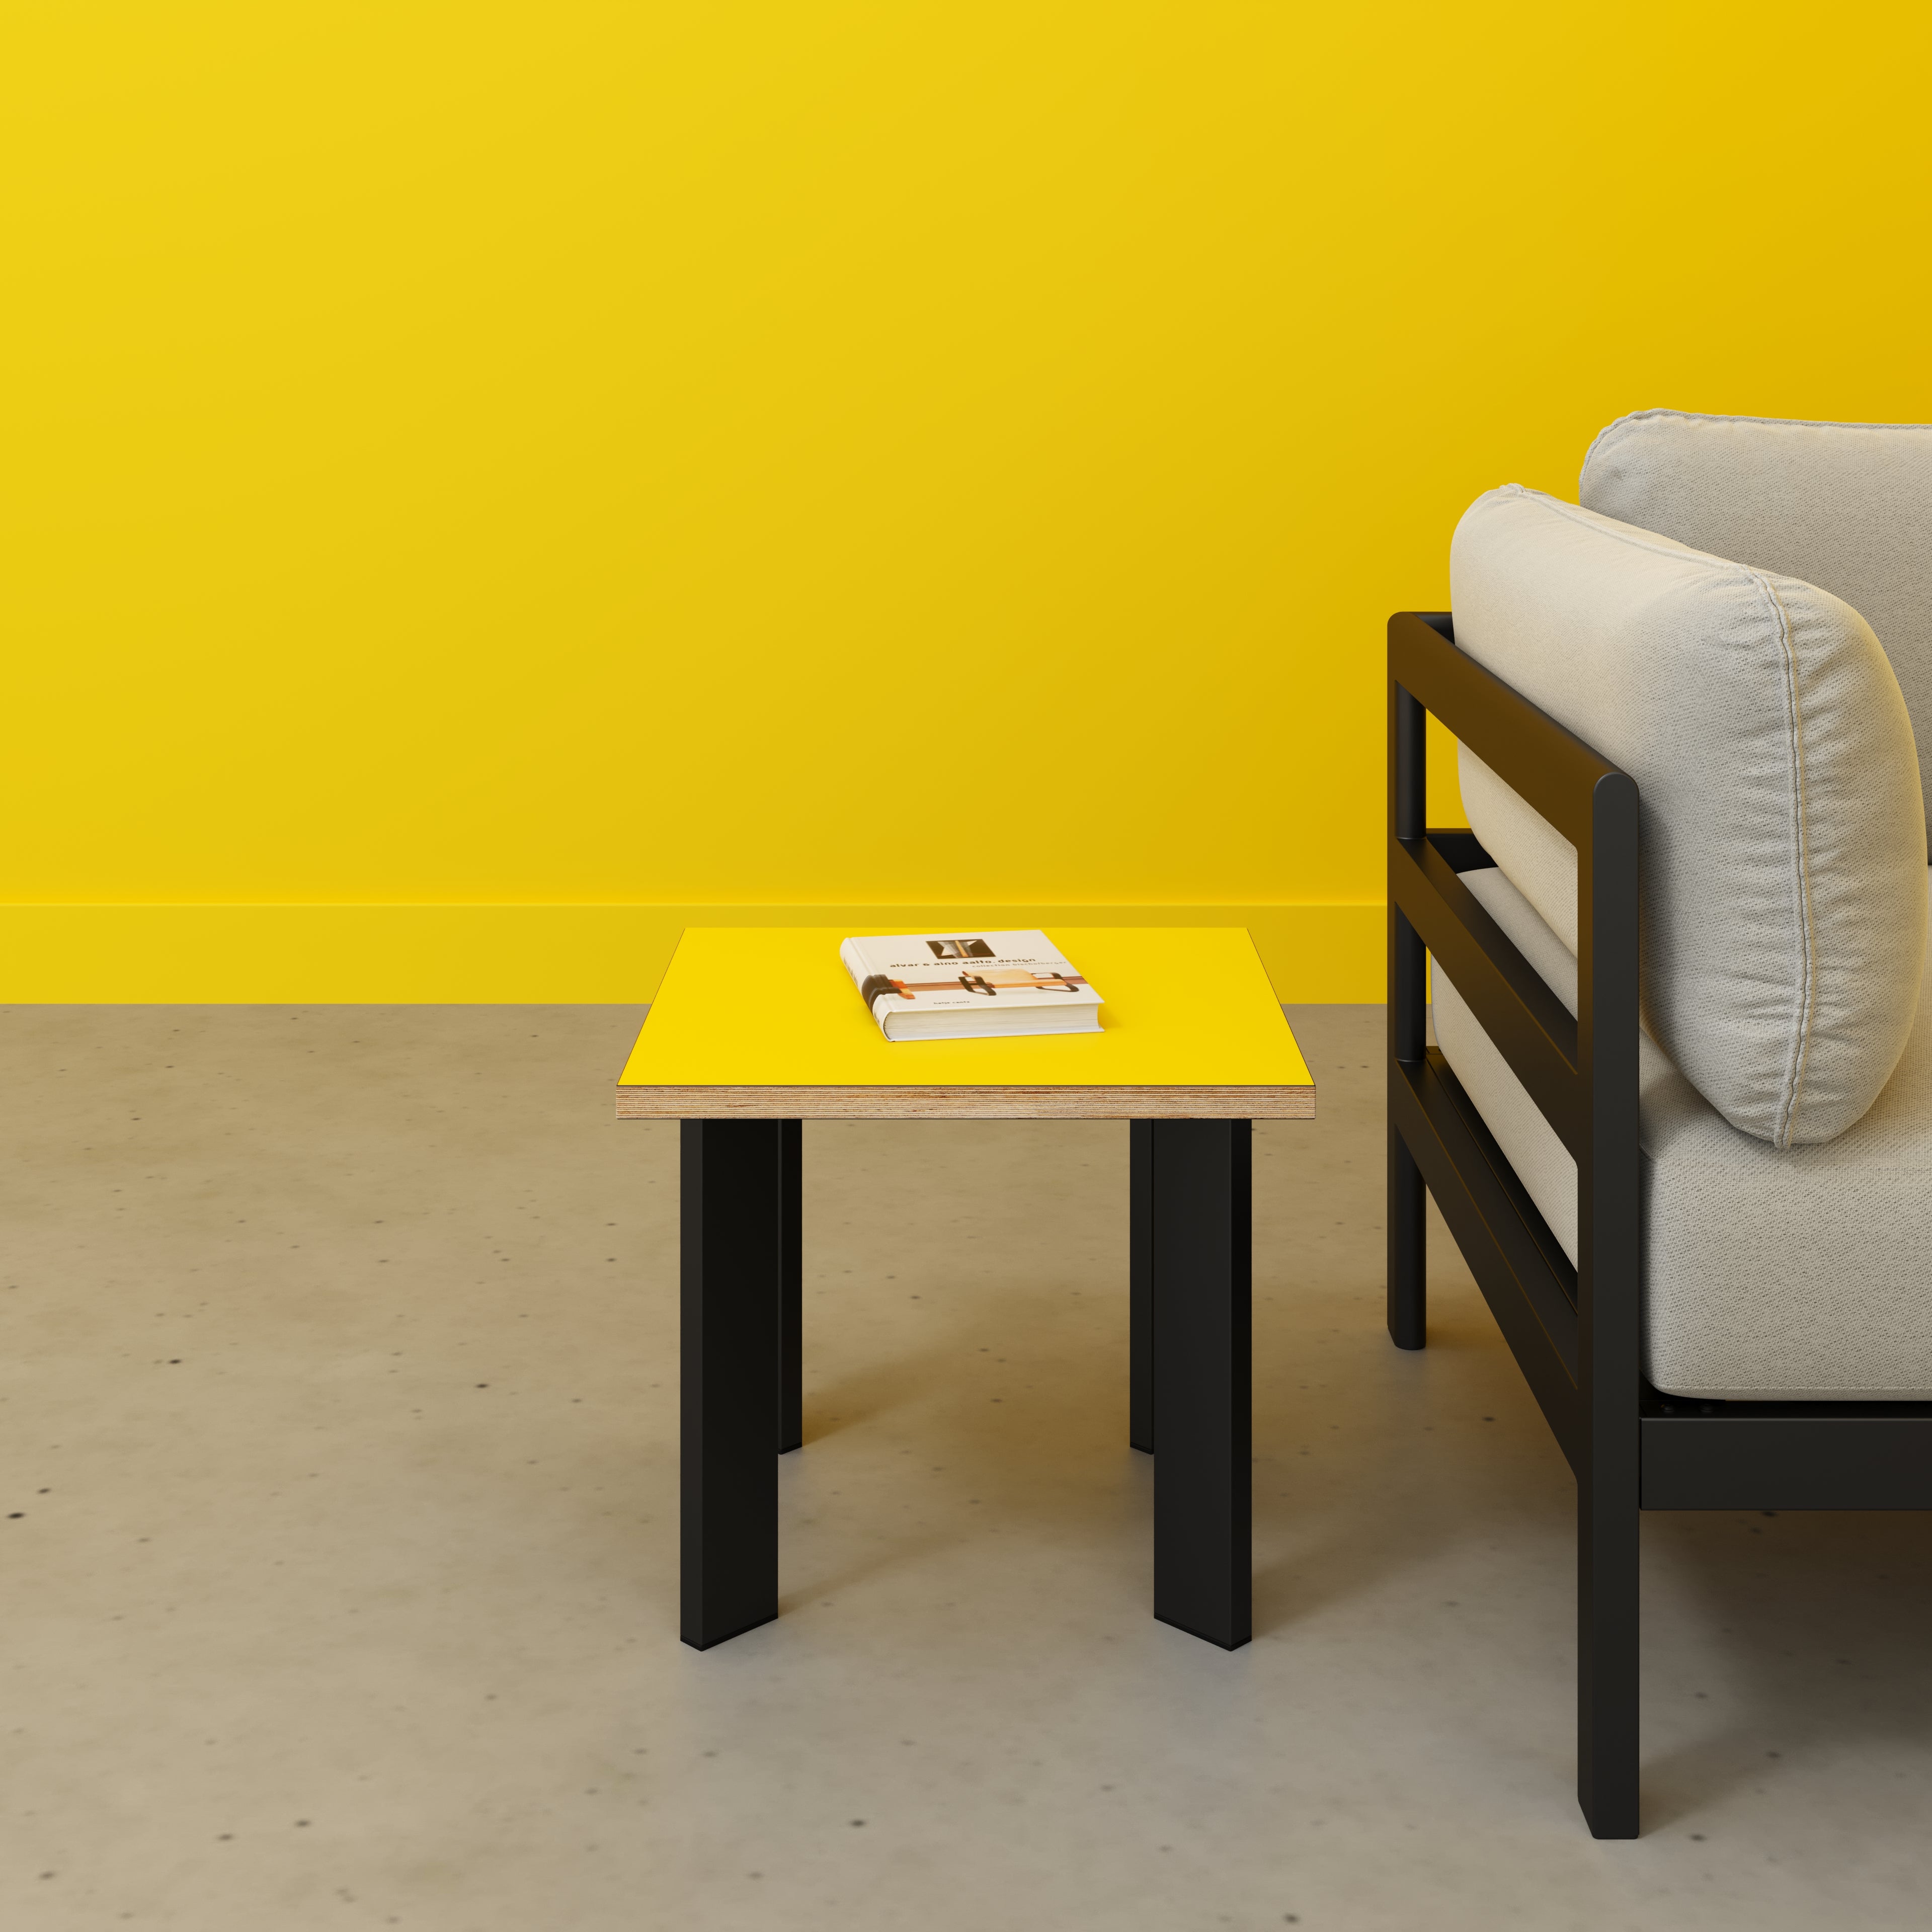 Side Table with Rectangular Single Pin Legs - Formica Chrome Yellow - 500(w) x 500(d) x 425(h)